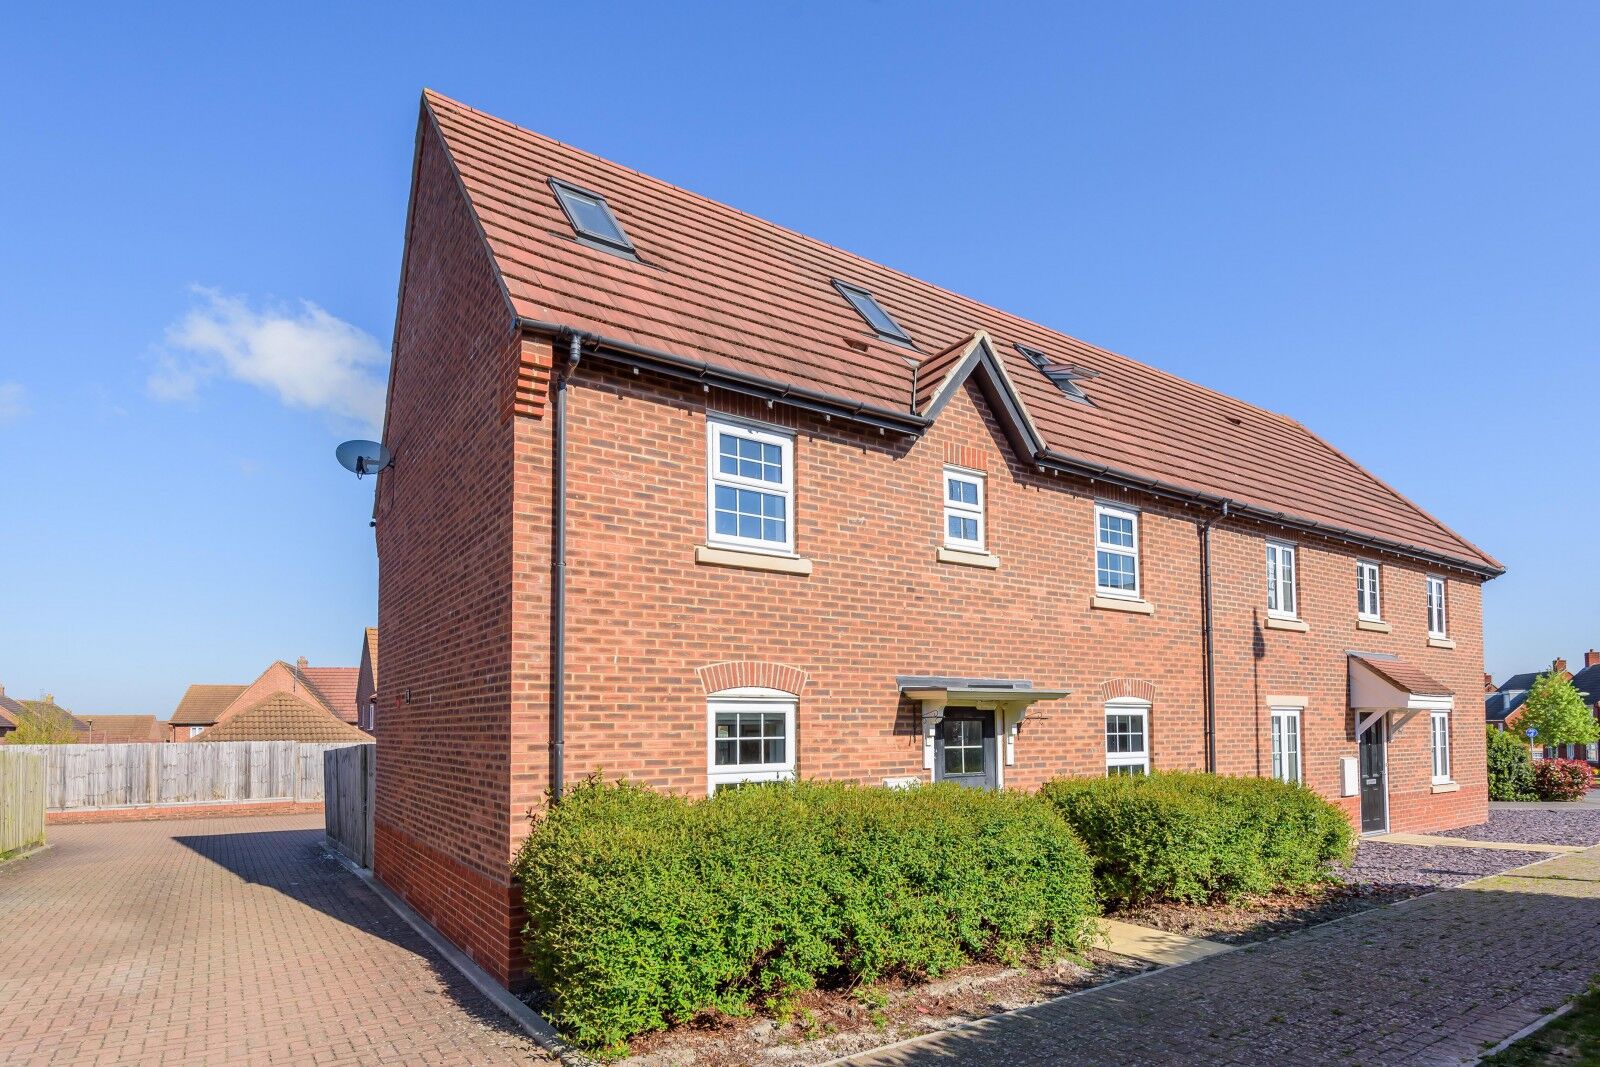 4 bedroom semi detached house for sale Sir Frank Williams Avenue, Didcot, OX11, main image